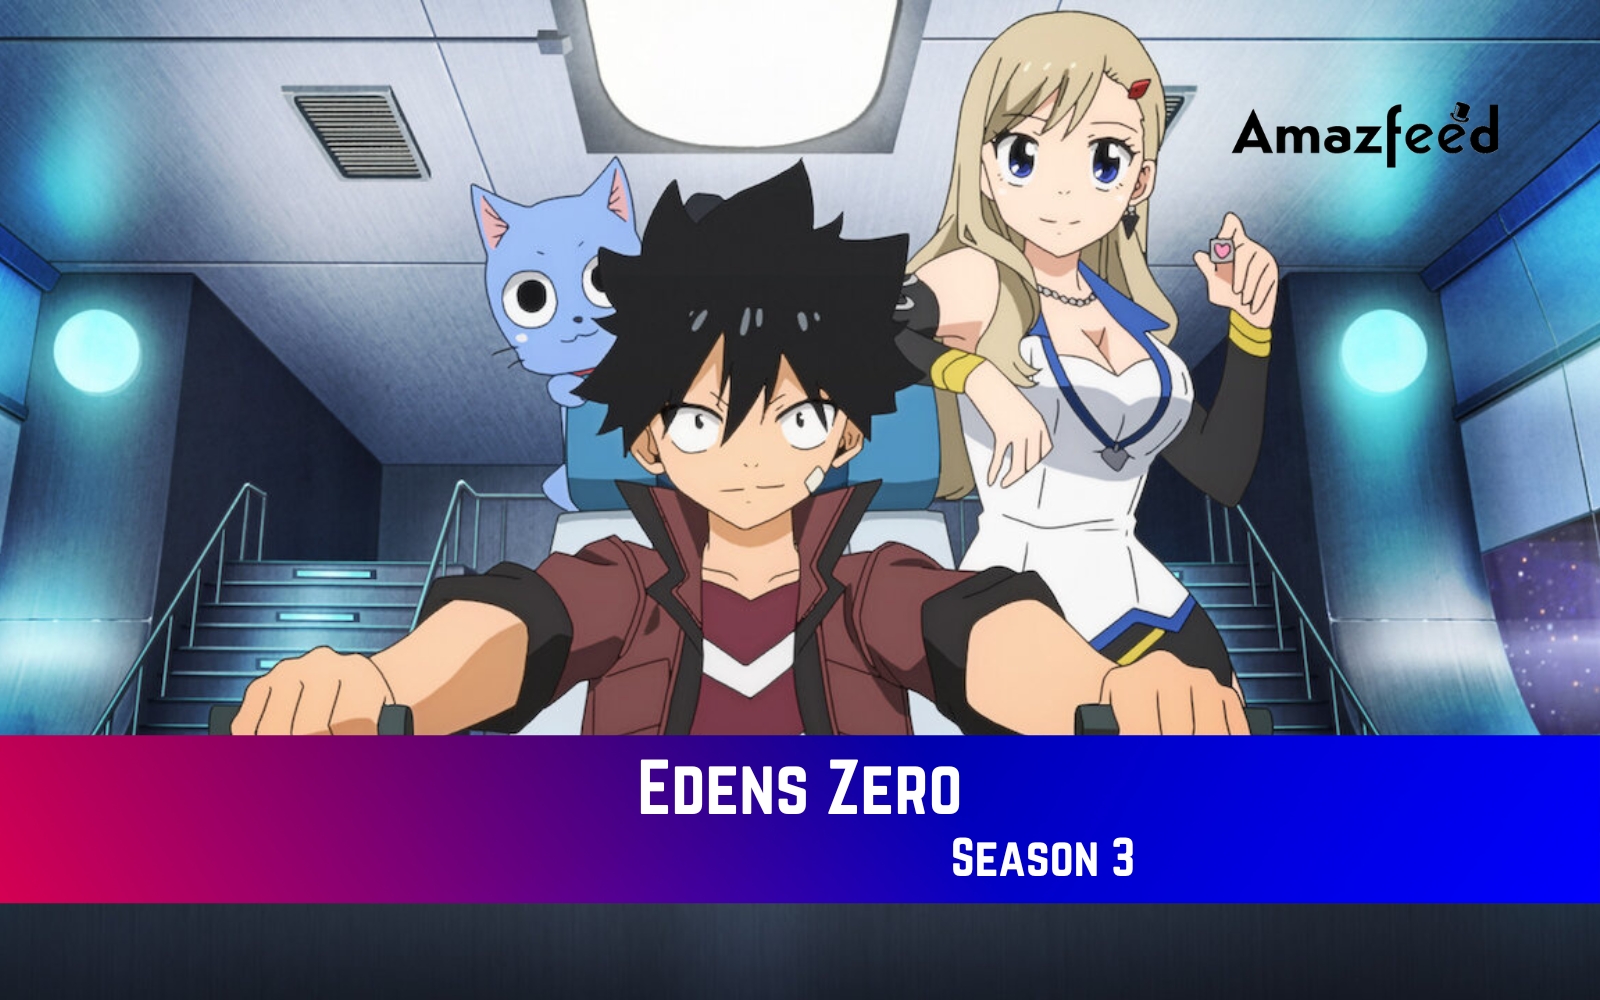 Shiki and his friends are heading to Crunchyroll! 💥 EDENS ZERO